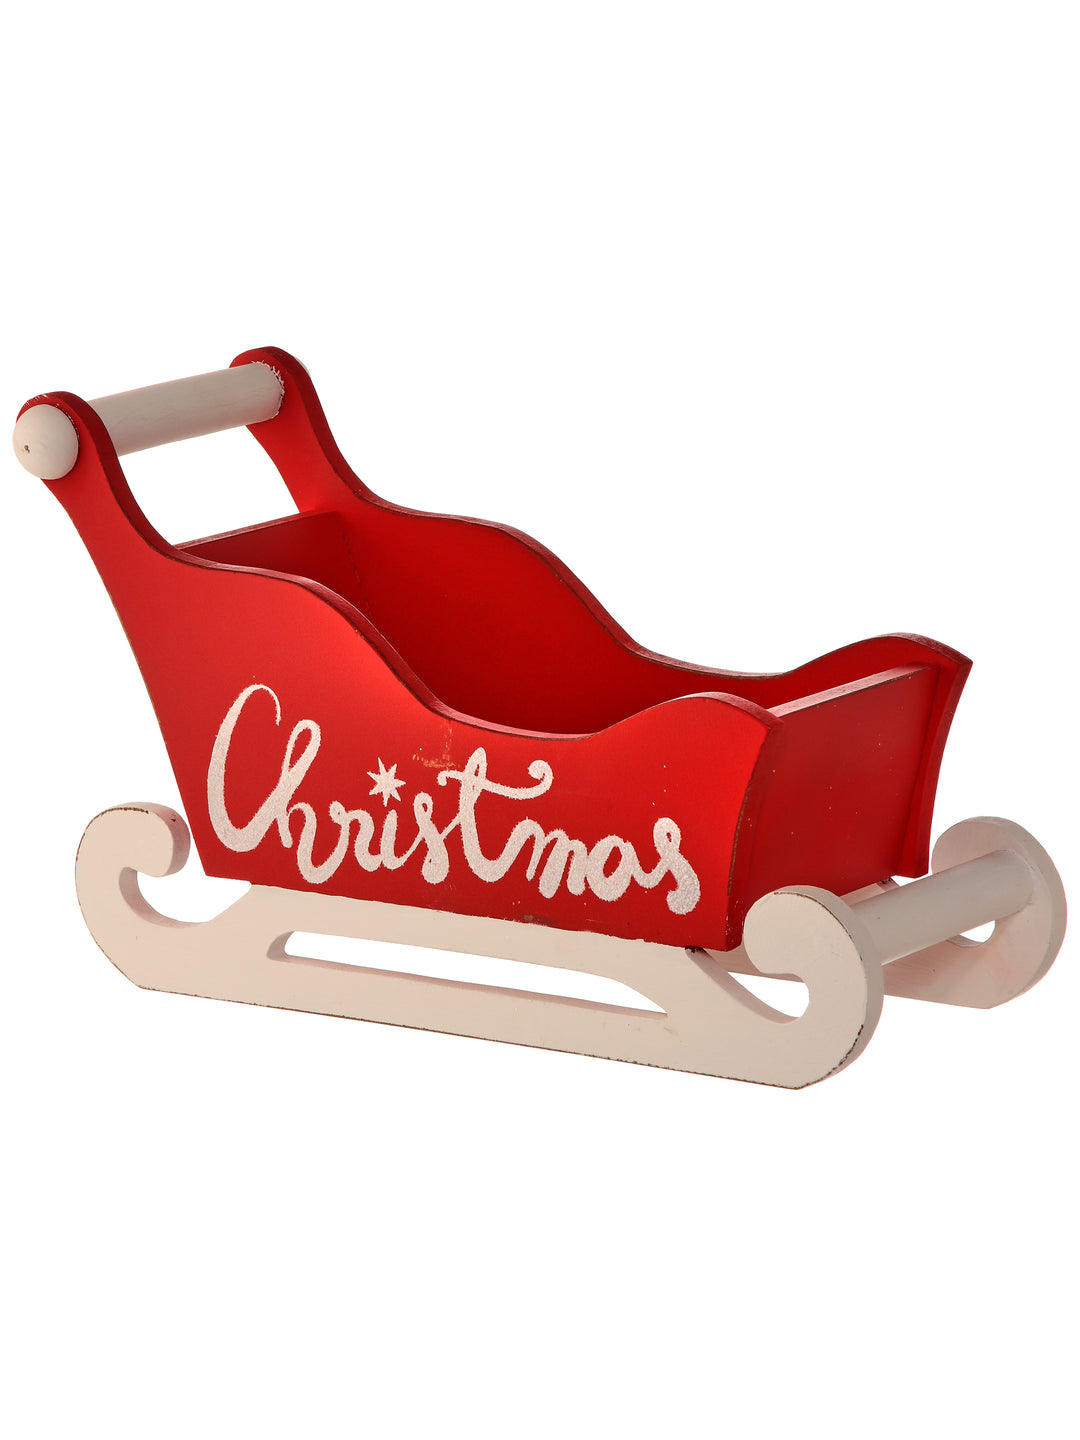 Regency 13" MDF Christmas Sleigh Container in Red White